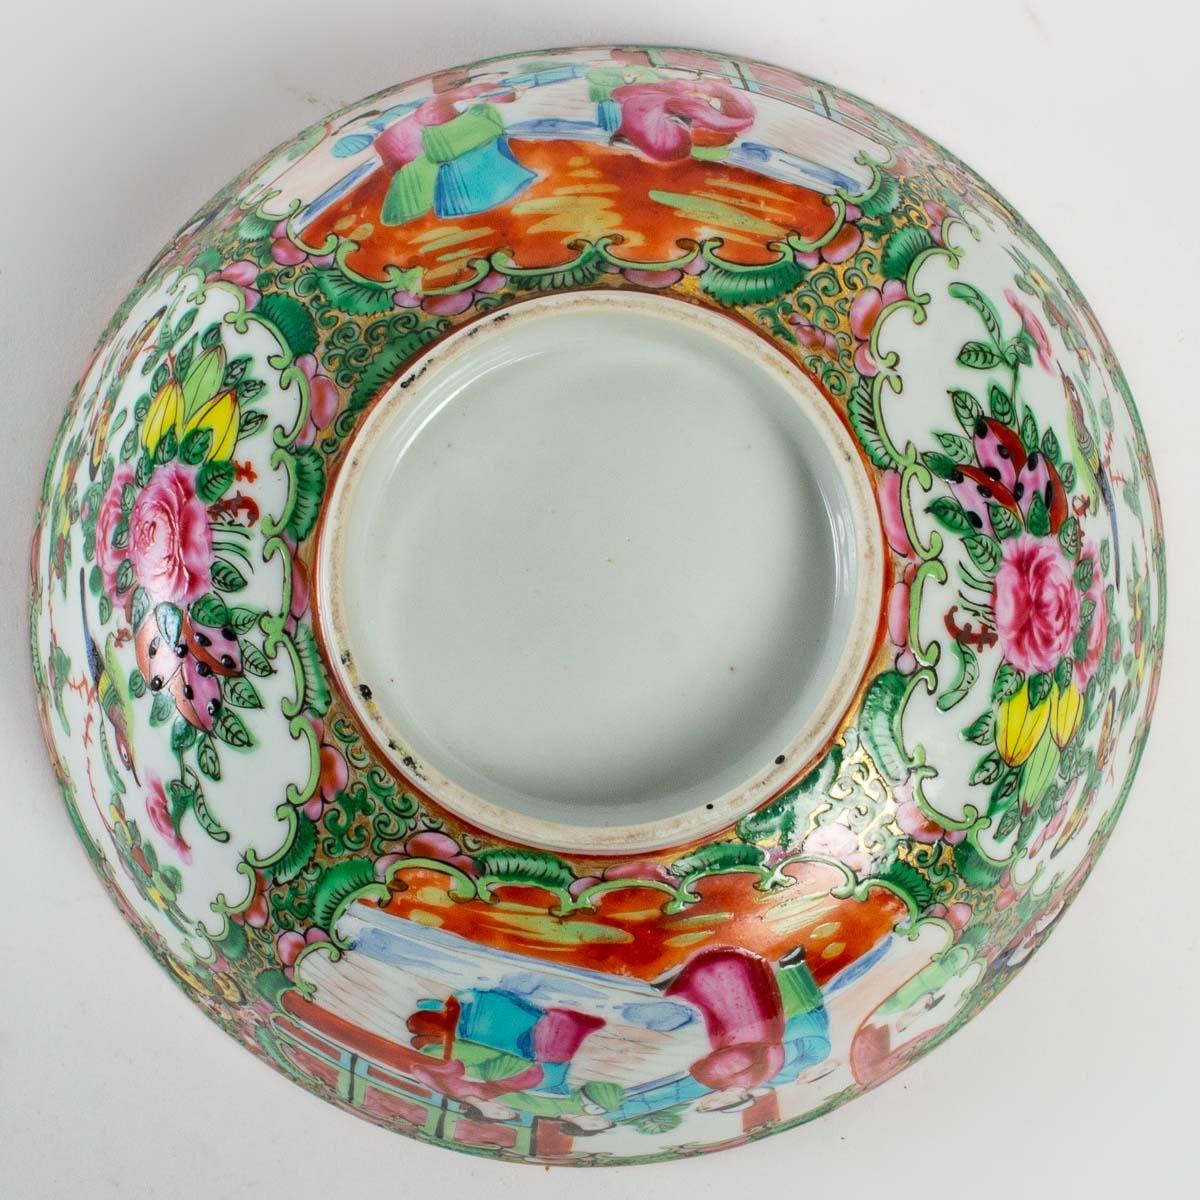 Lovely Canton polychrome porcelain bowl.
Period : Mid 19th century
Dimensions : Diameter 20cm
The full and rather elaborate backgrounds use gold.